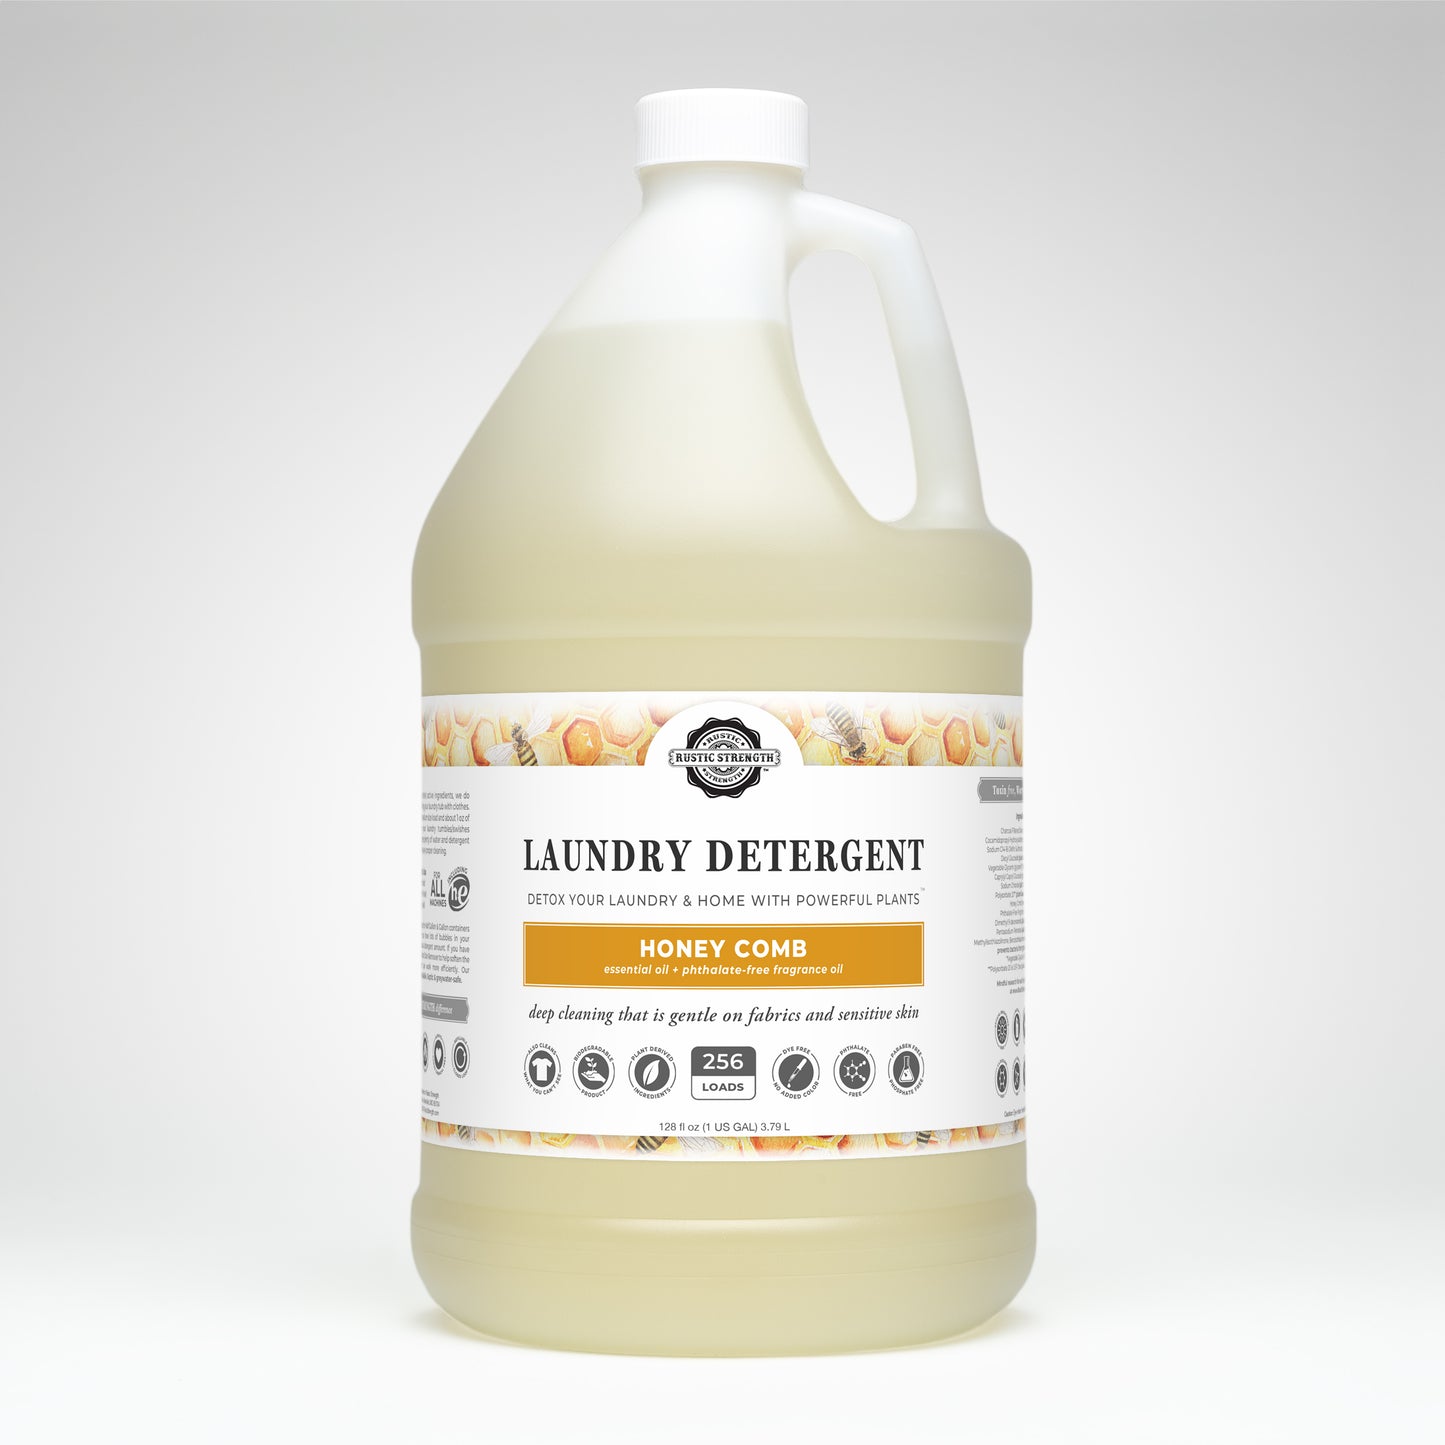 Laundry Detergent | Summer Scents